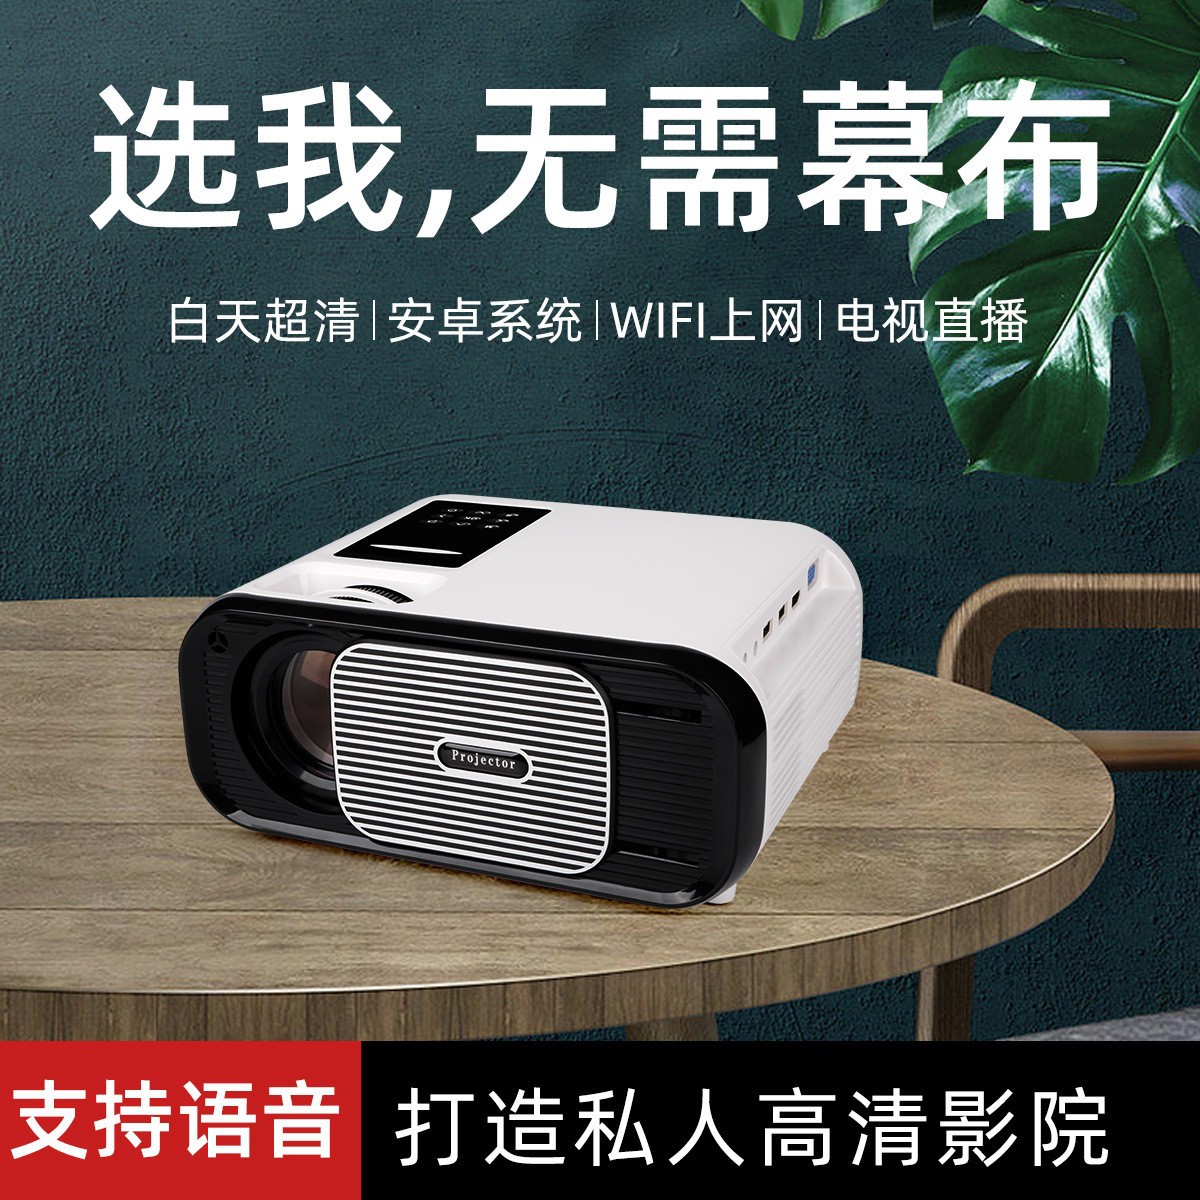 1080P Cross-Border New Arrival Android Projector Wireless Same Screen with Mobile Phone Smart Business Office Projector for Home Use